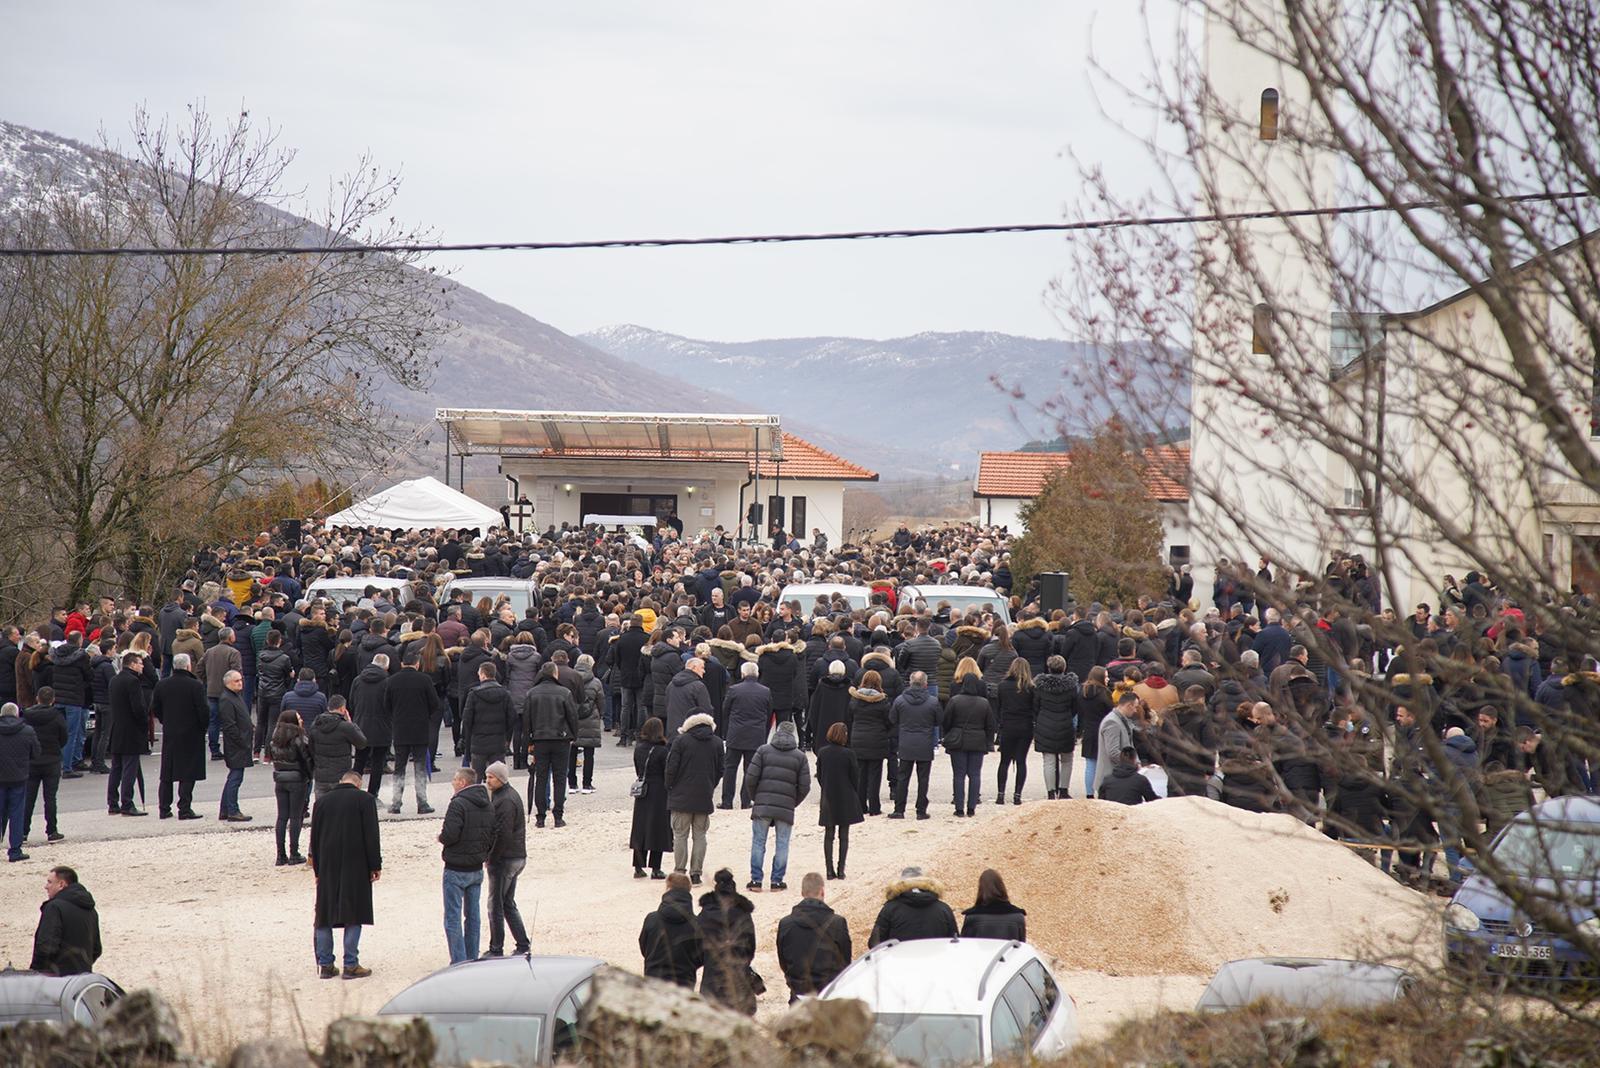 "Avaz" on the spot: A river of people arrives at the funeral of six young people from Posušje